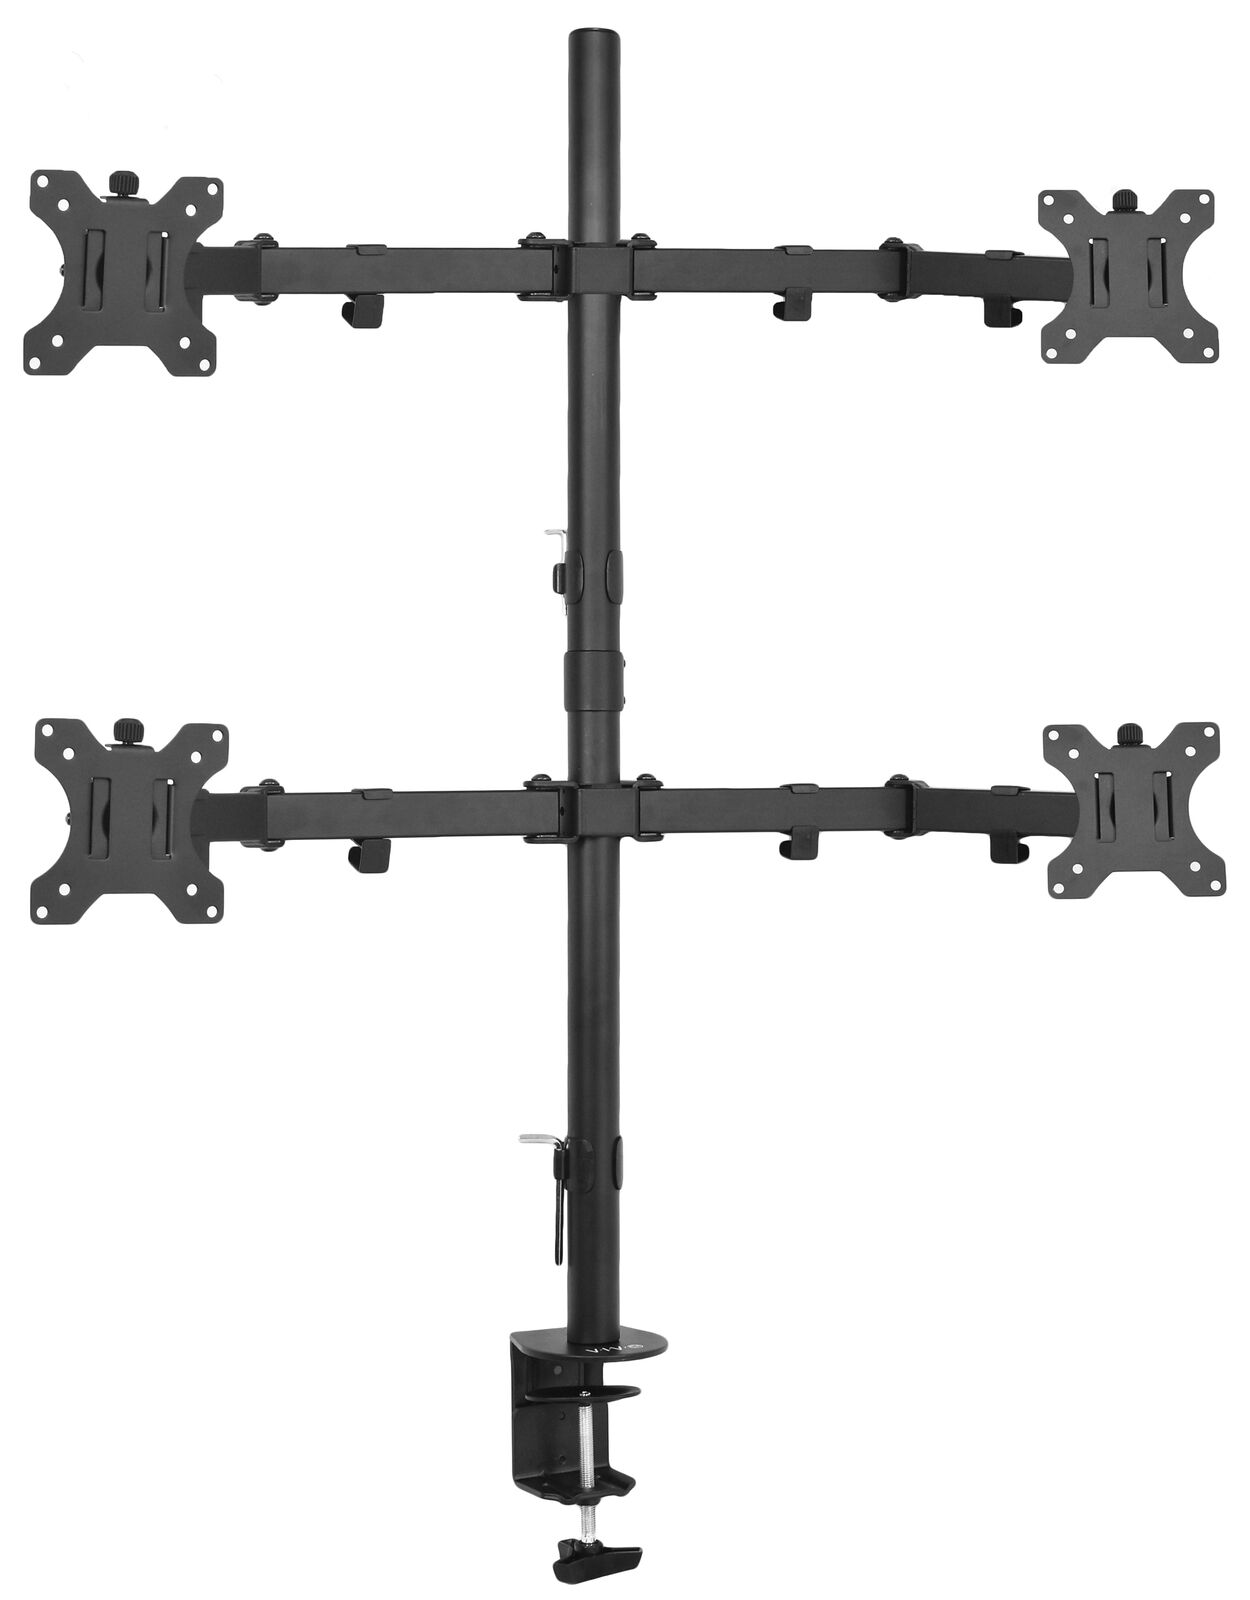 VIVO Quad Monitor Desk Mount Adjustable Stand Heavy Duty for 4 Screens up to 30